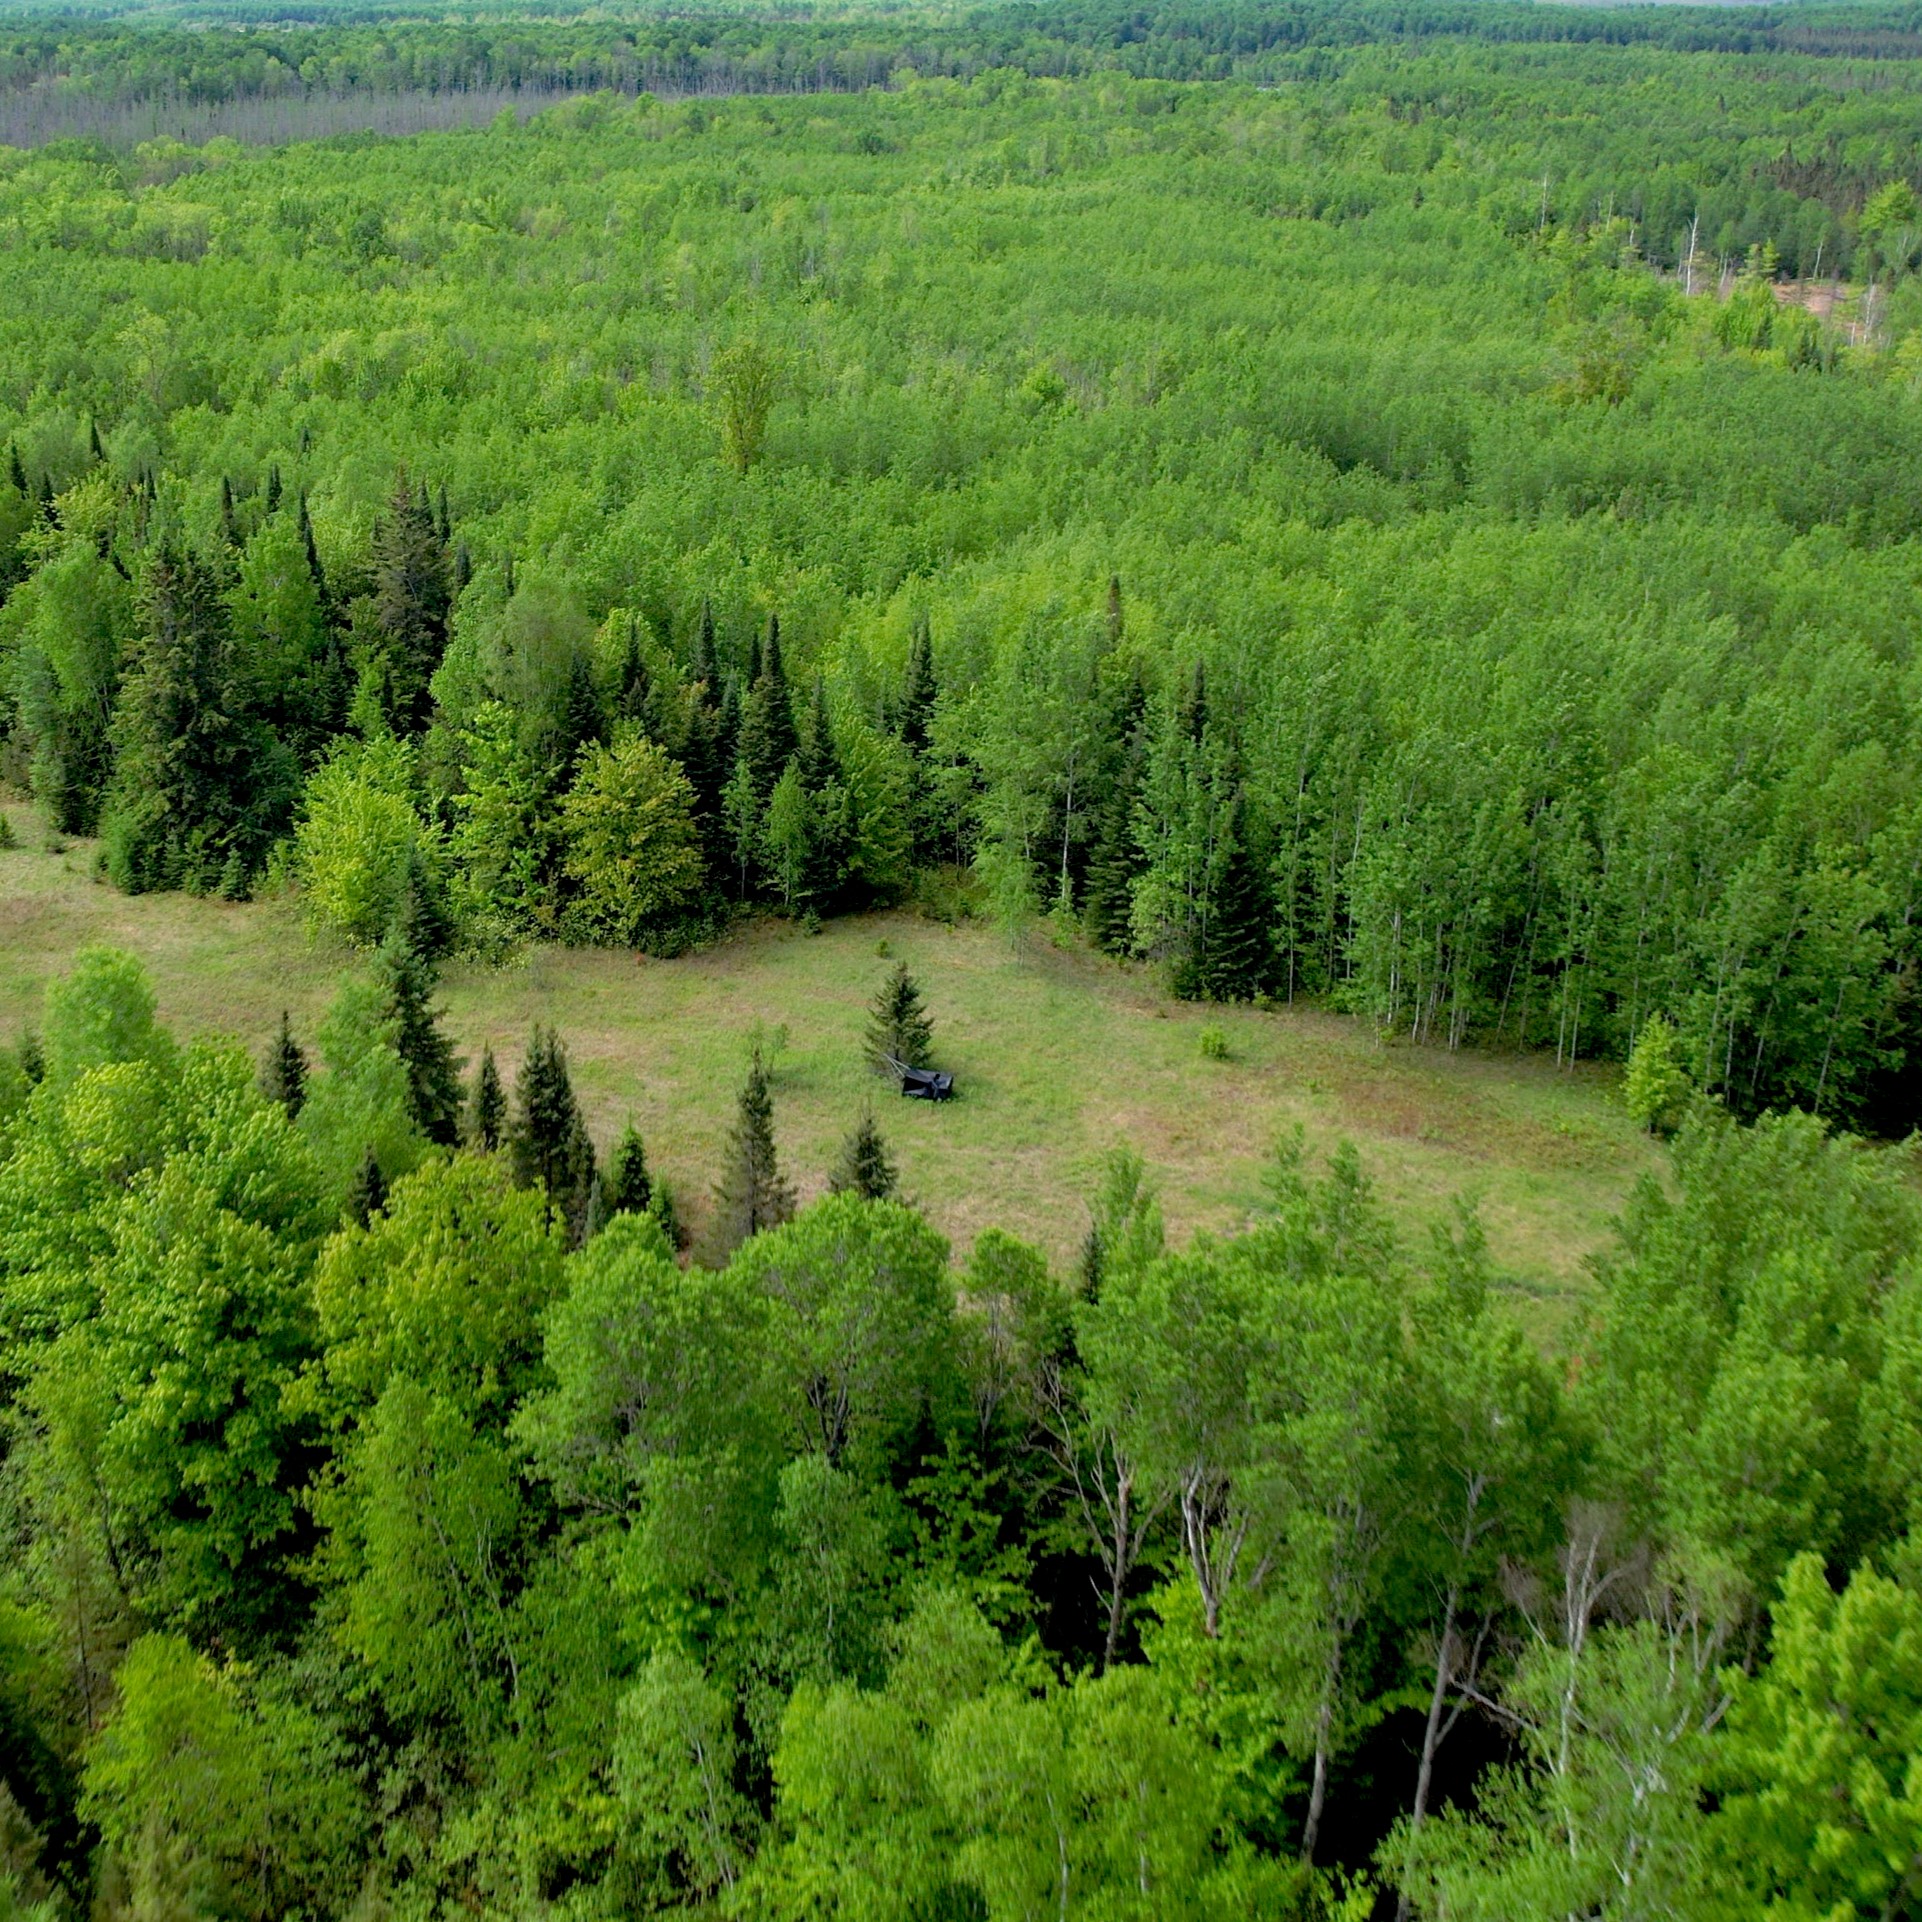 The Fond du Lac Band is the steward of thousands of acres of pristine woodlands in Minnesota.